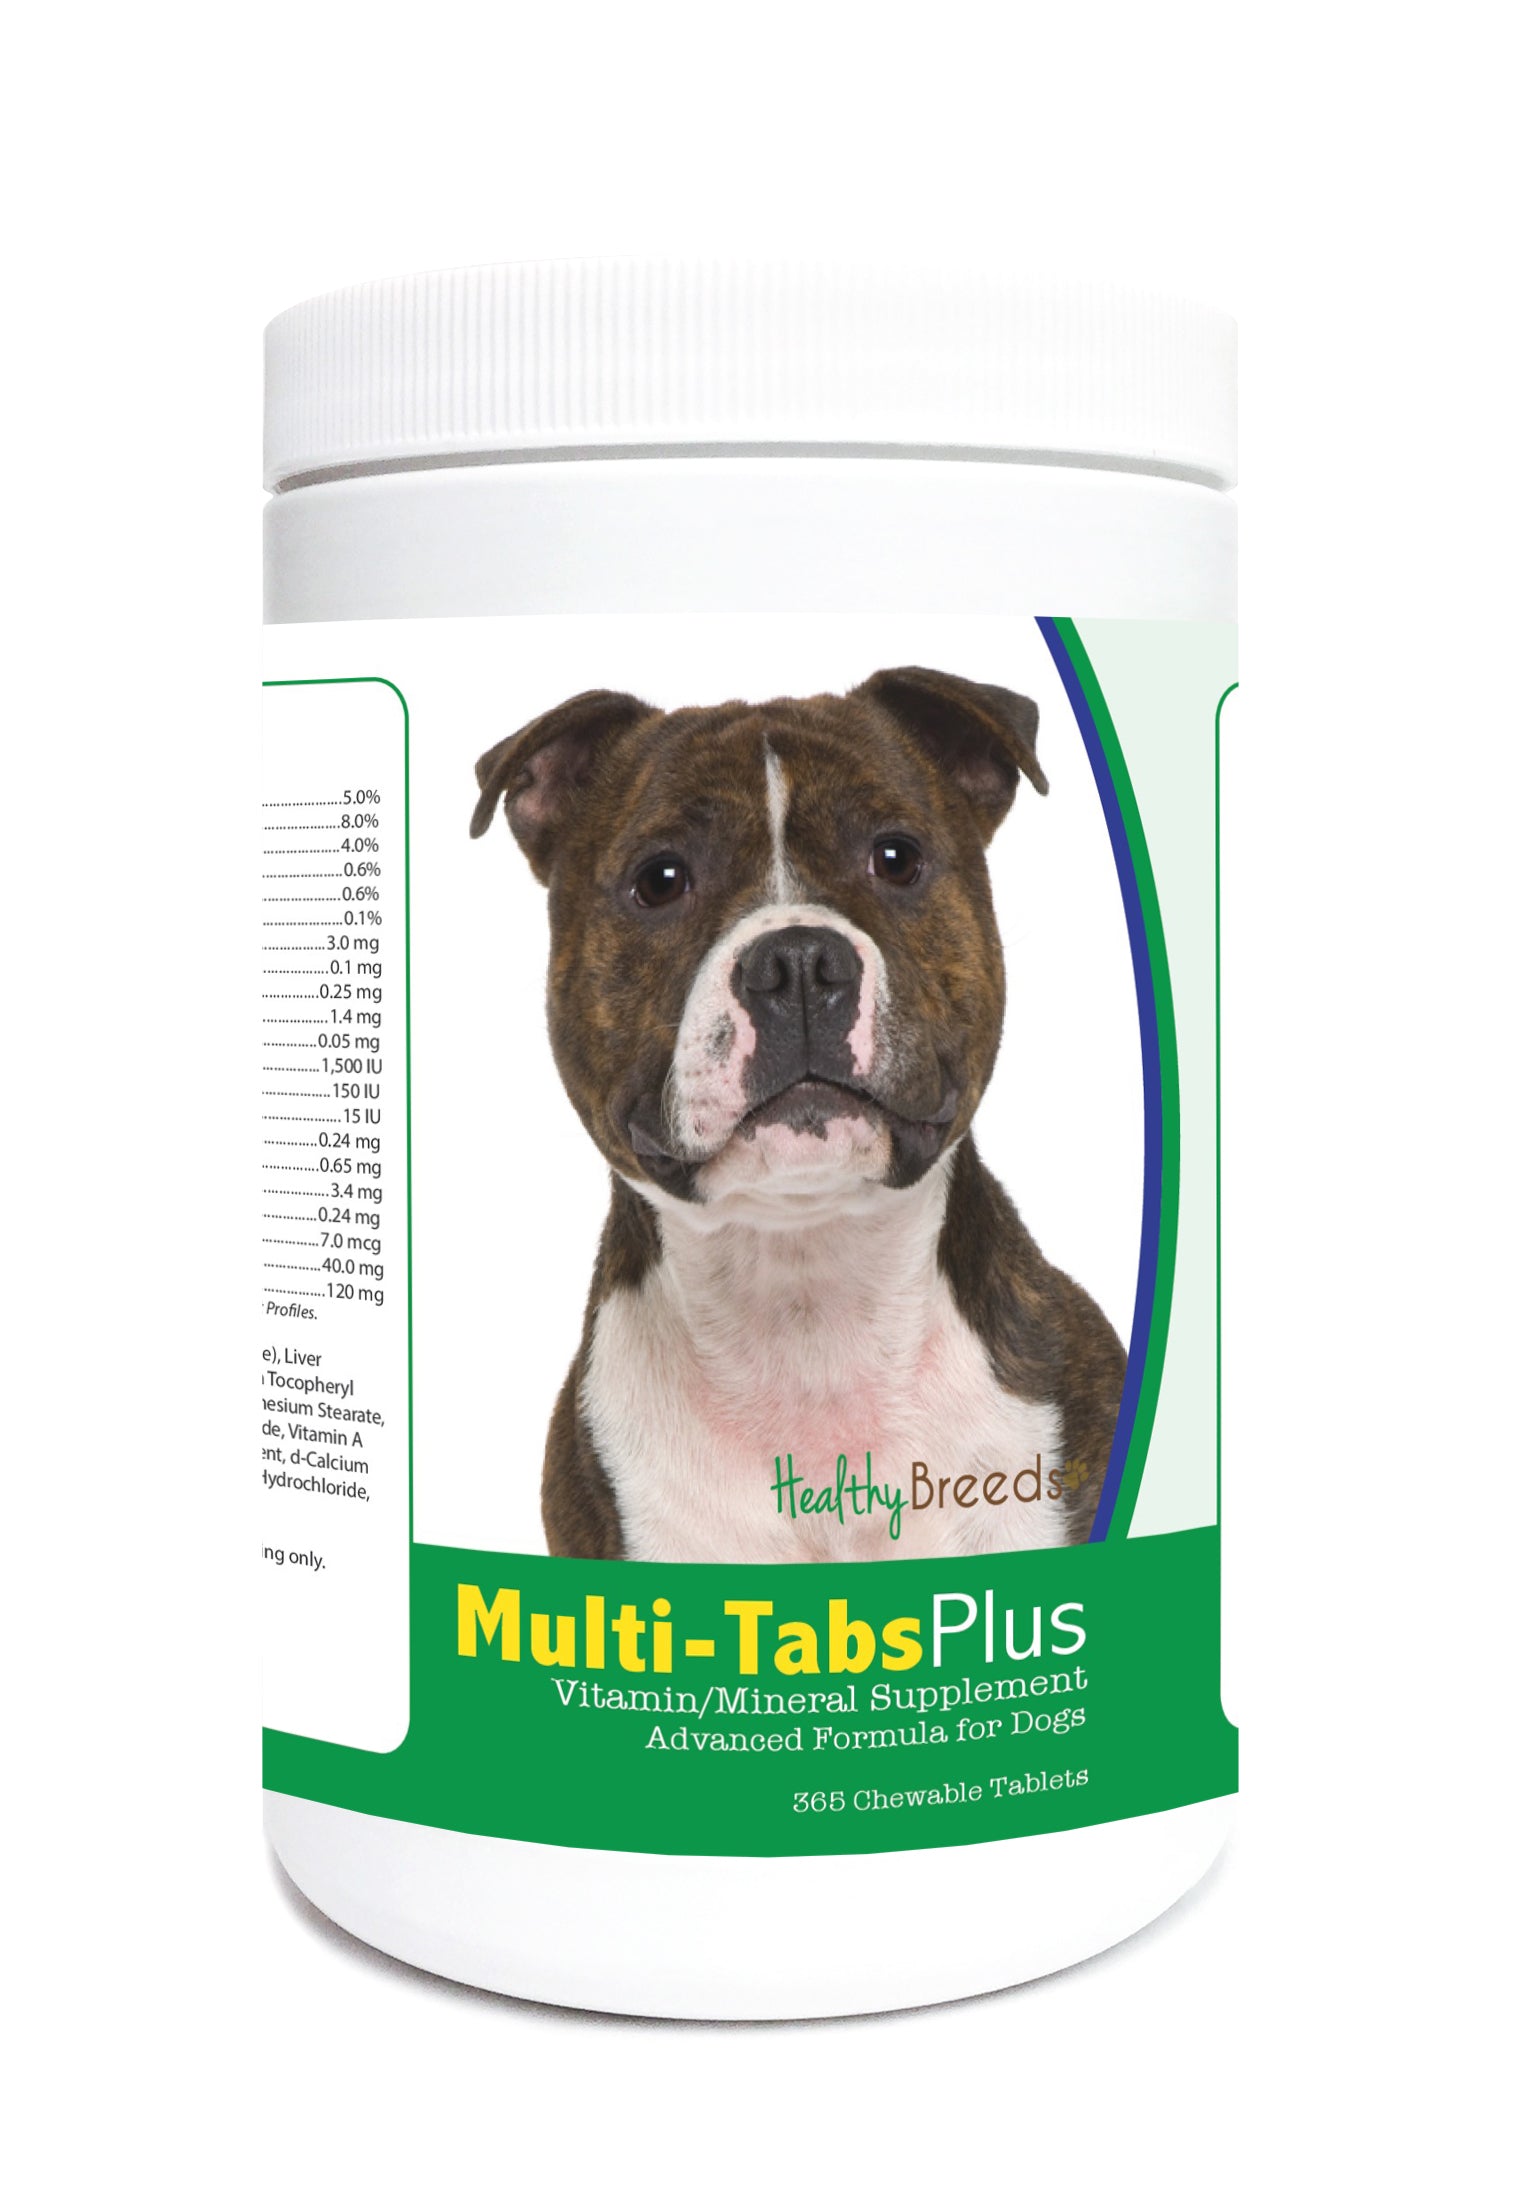 Staffordshire Bull Terrier Multi-Tabs Plus Chewable Tablets 365 Count